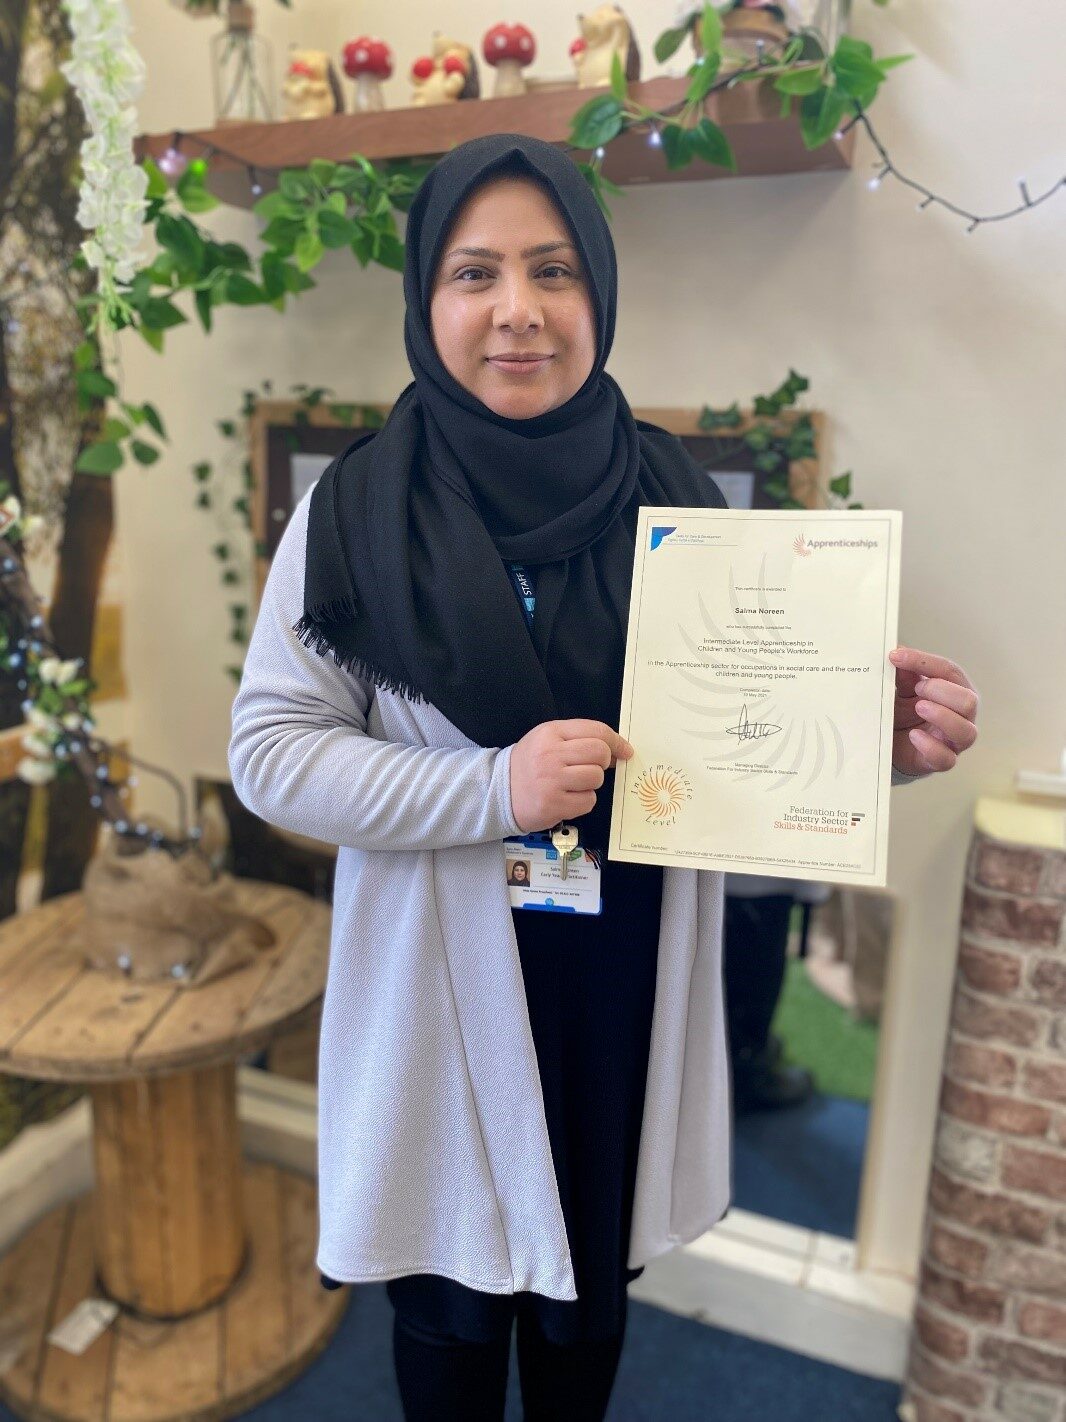 A lady in a headscarf holding a certificate and smiling